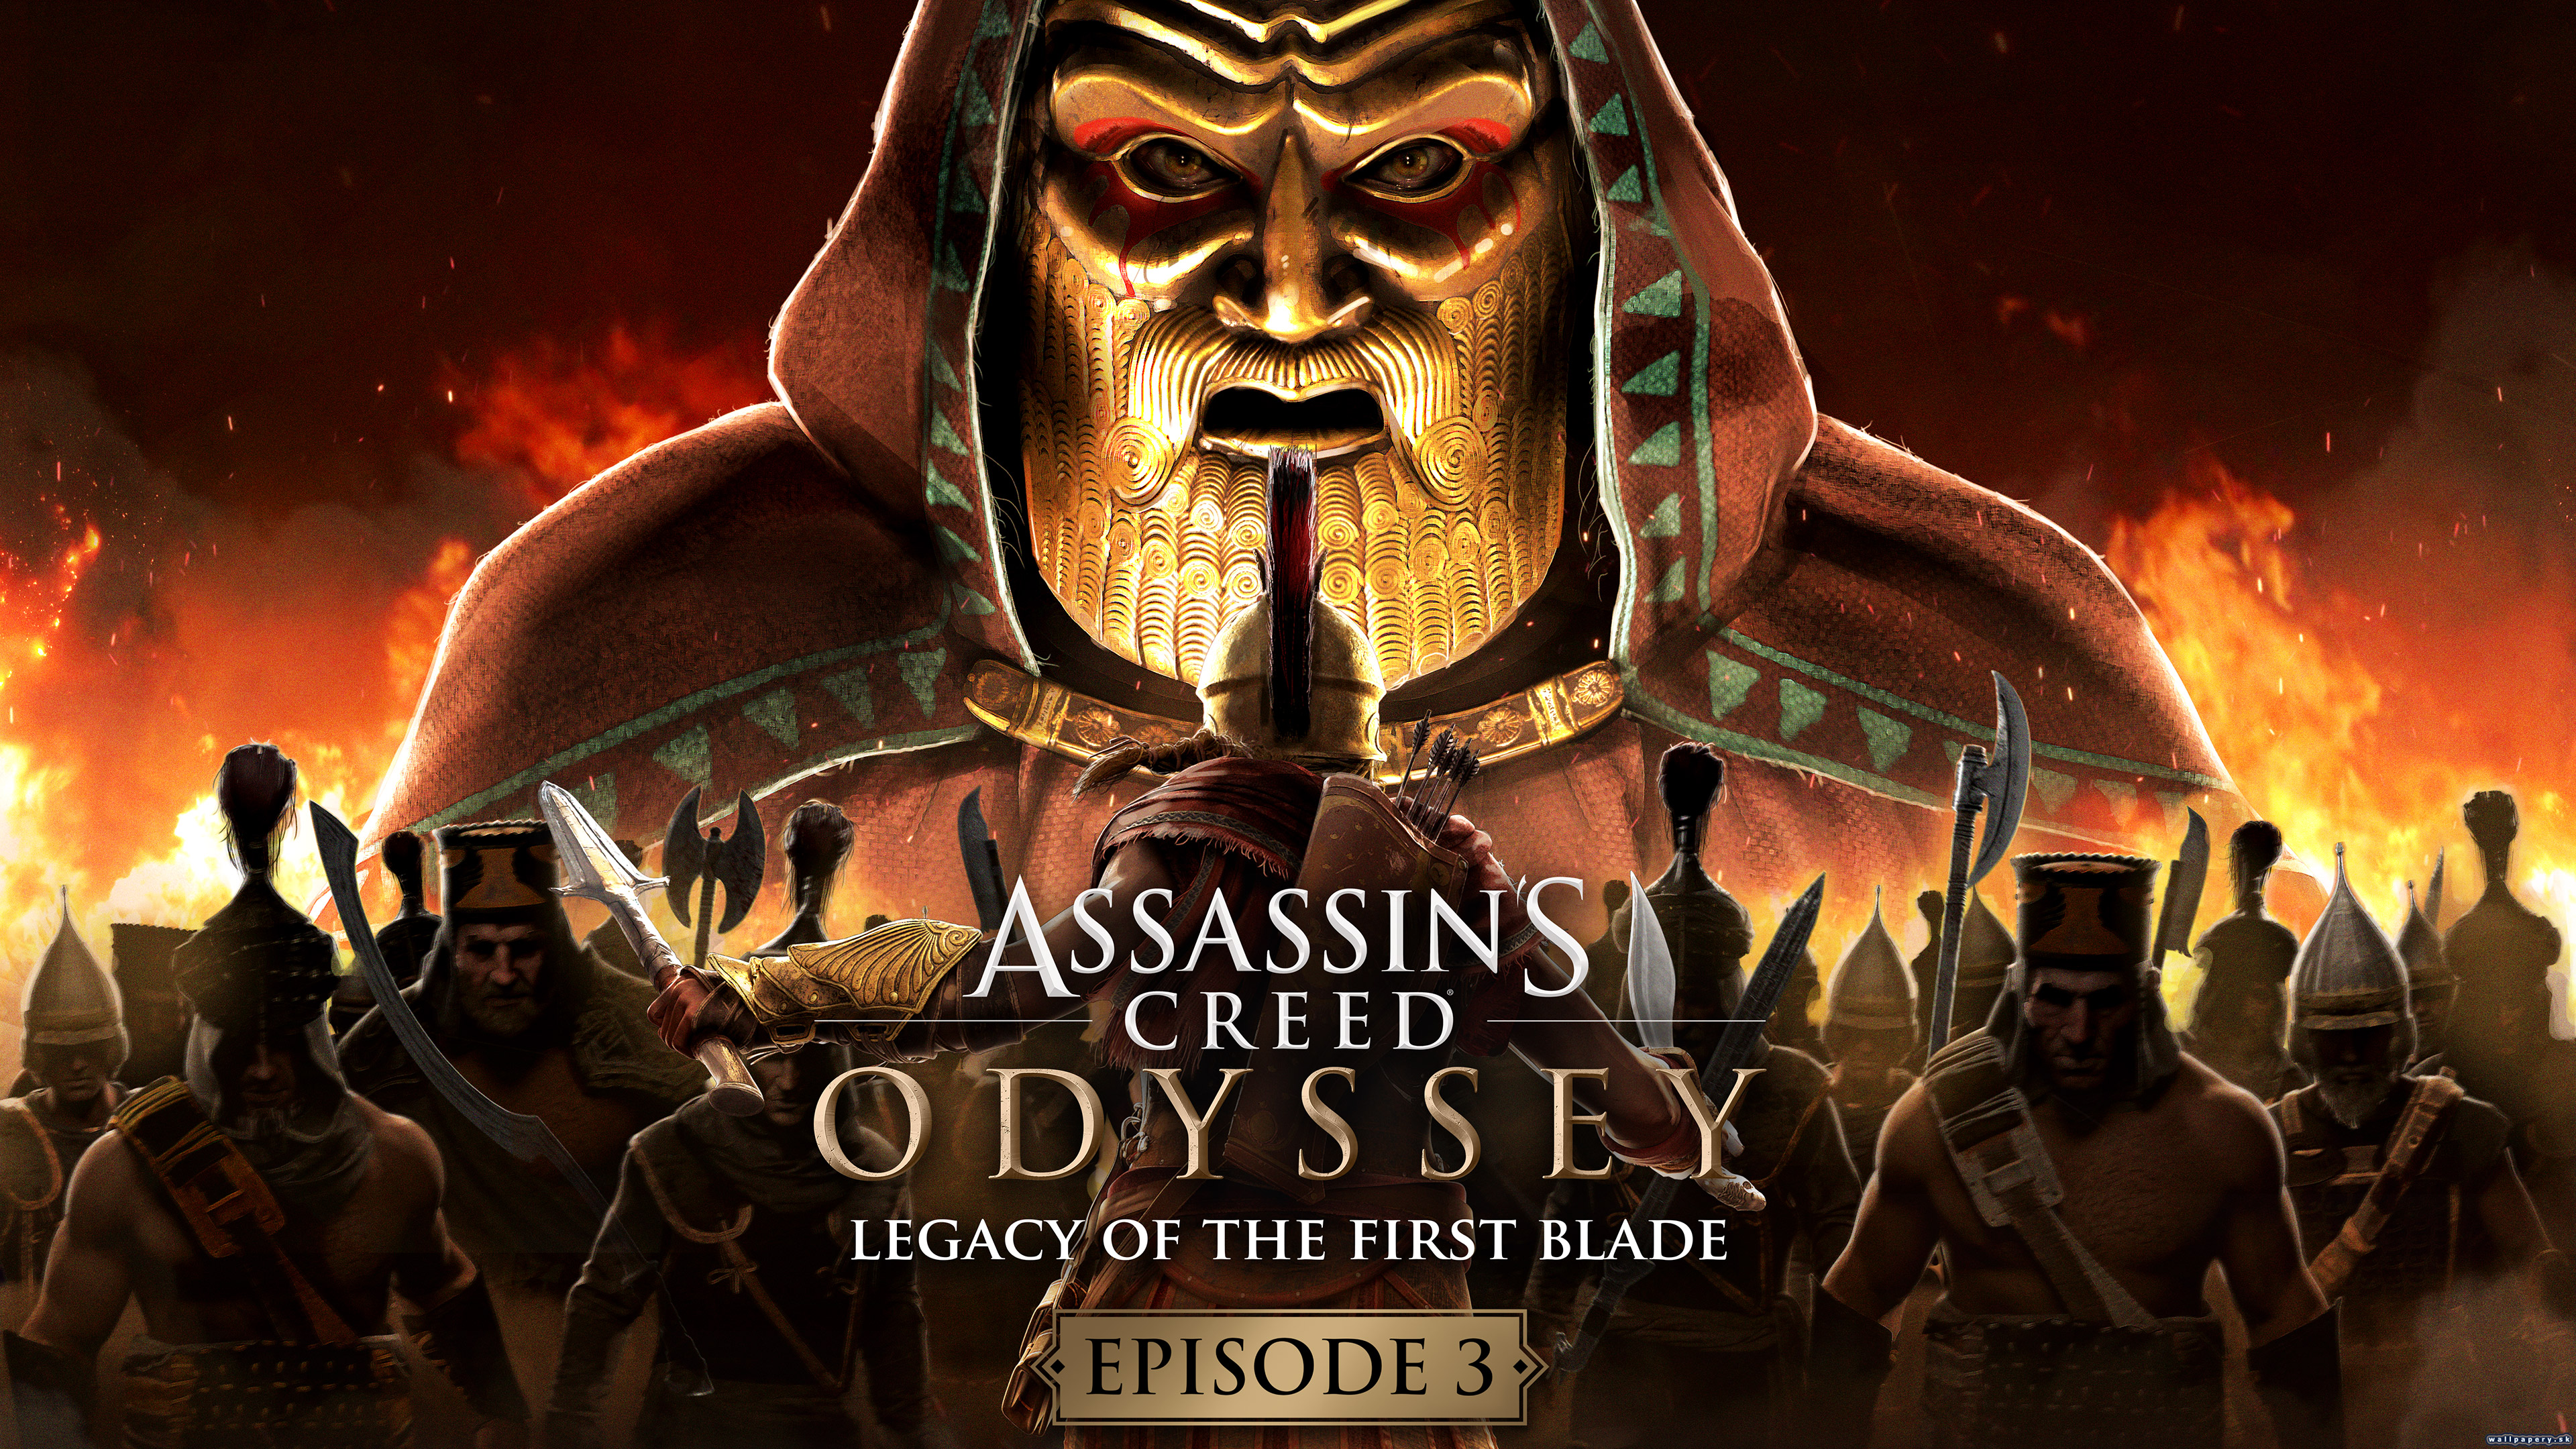 Assassin's Creed: Odyssey - Legacy of the First Blade - wallpaper 5